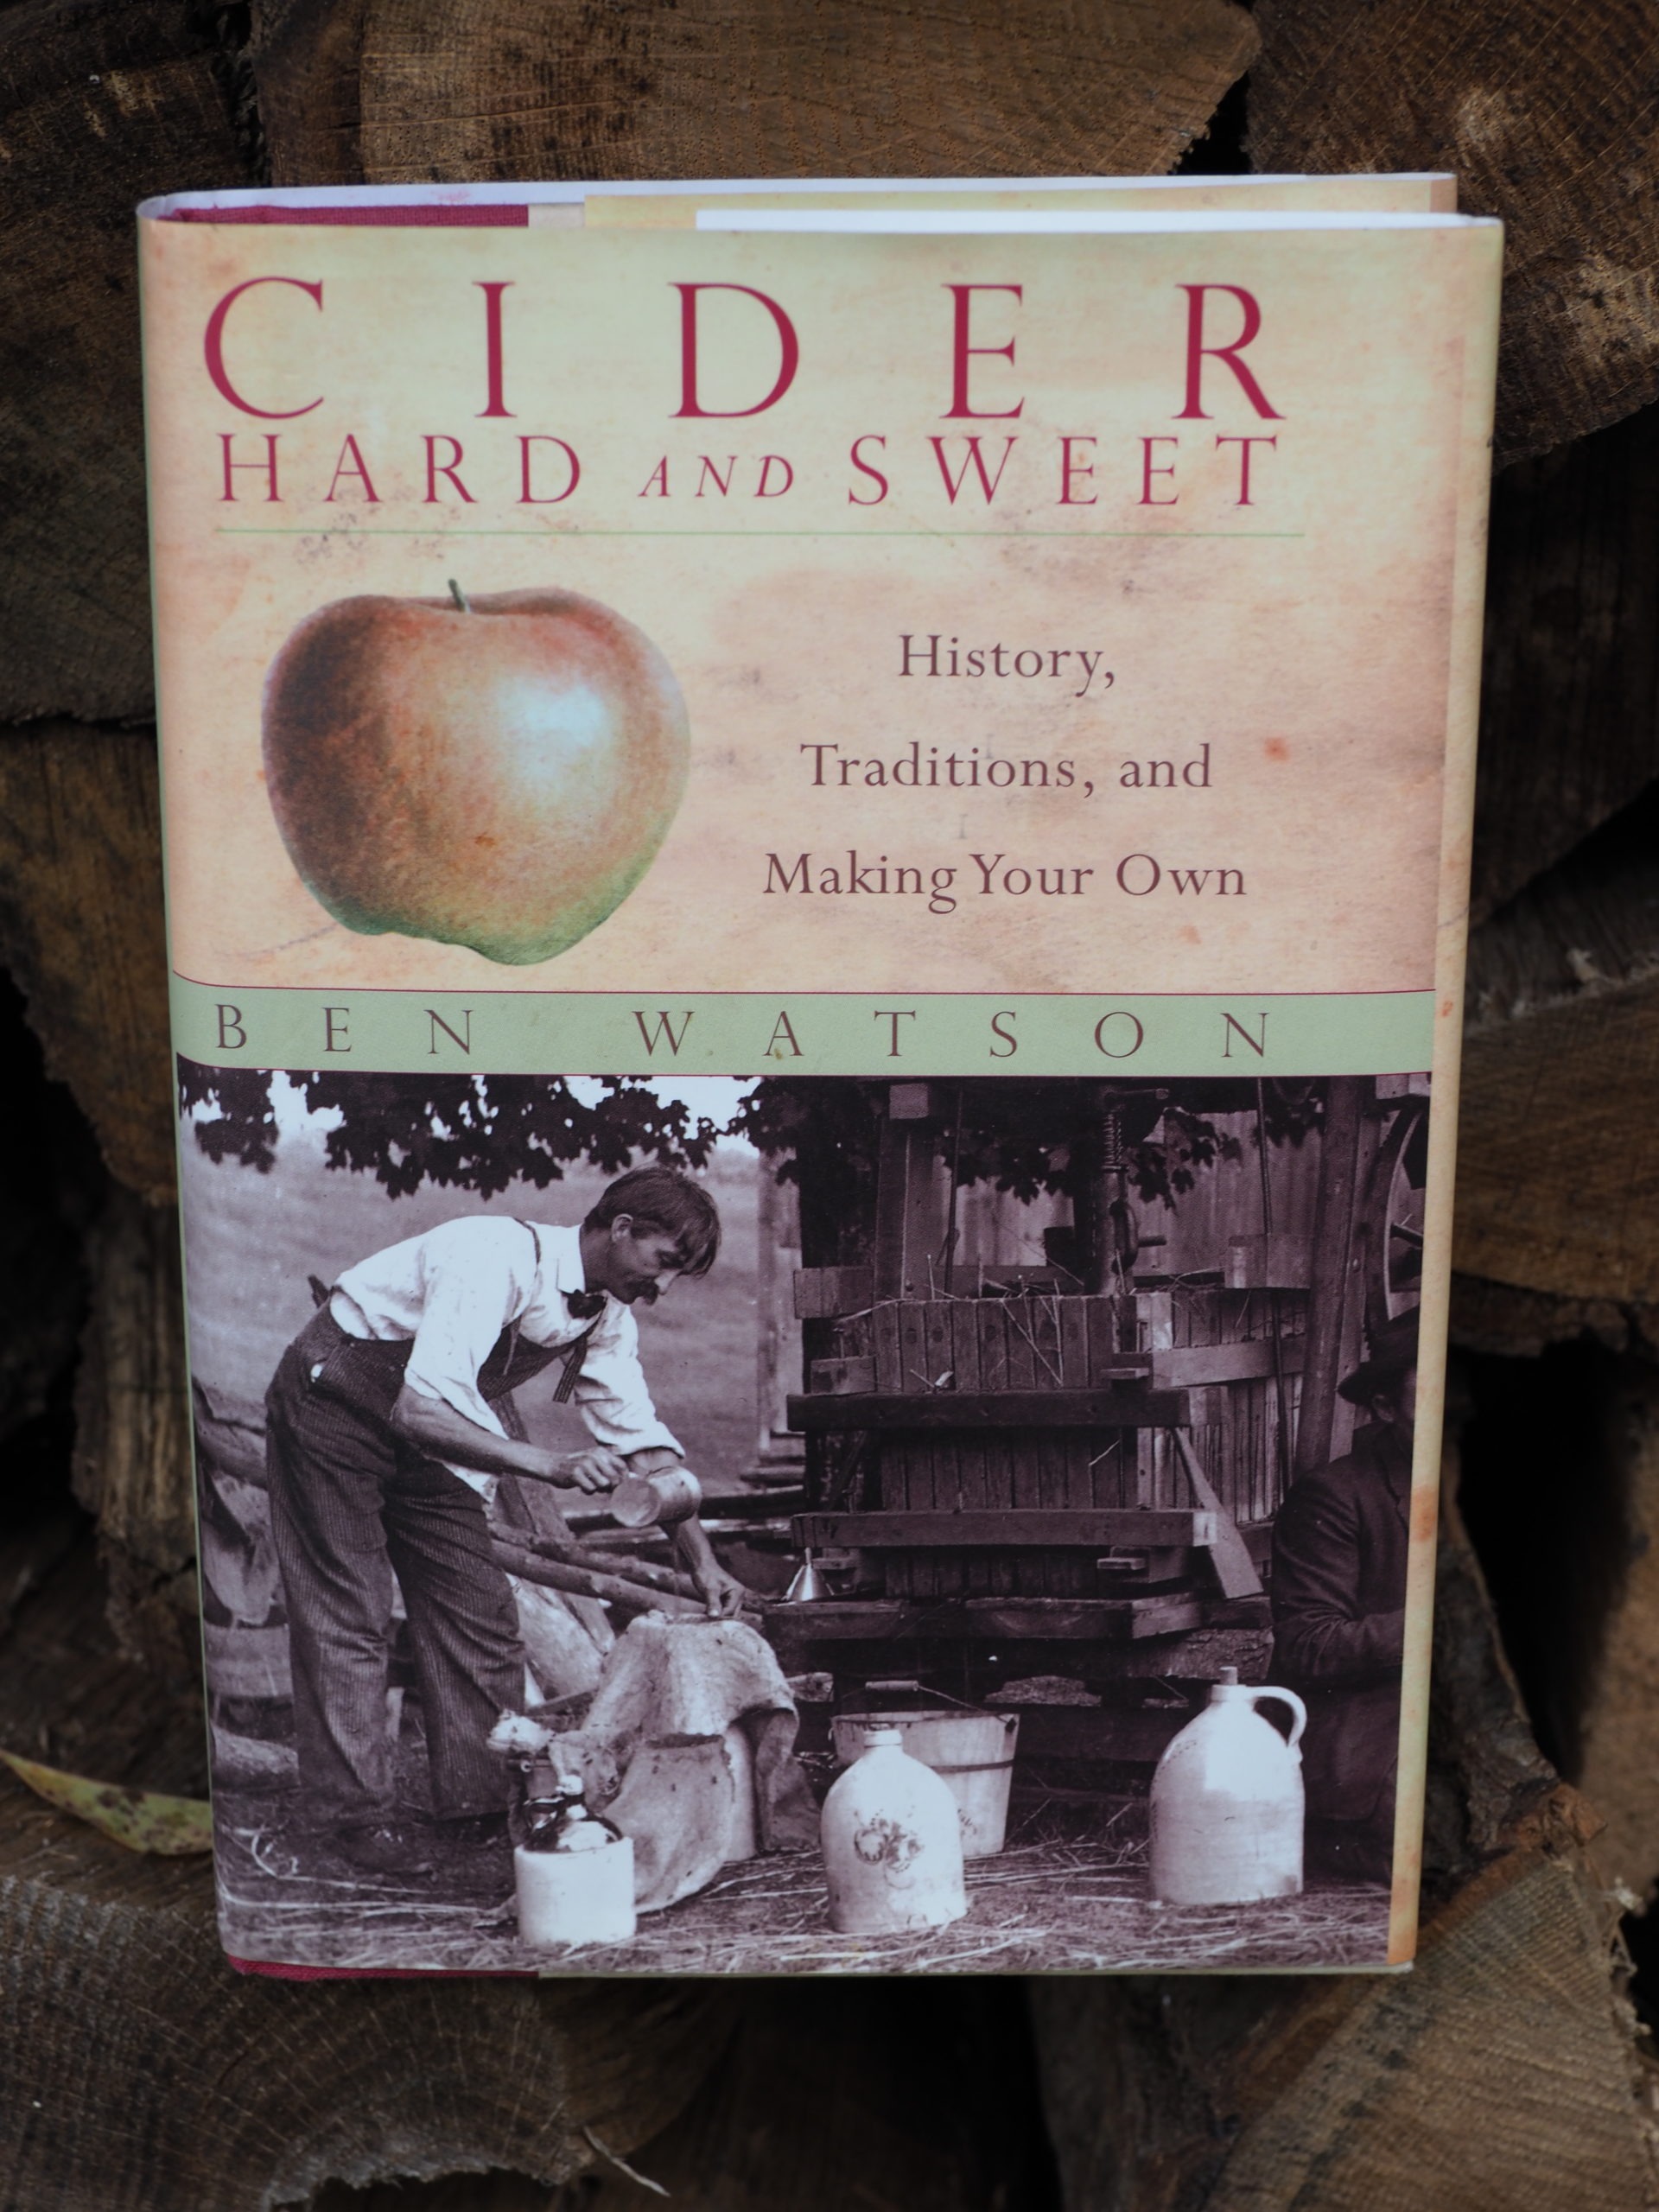 This is one of the best (of many) recent books on cider, but this one has the fascinating history of cider as well as details on making “soft” and hard ciders.